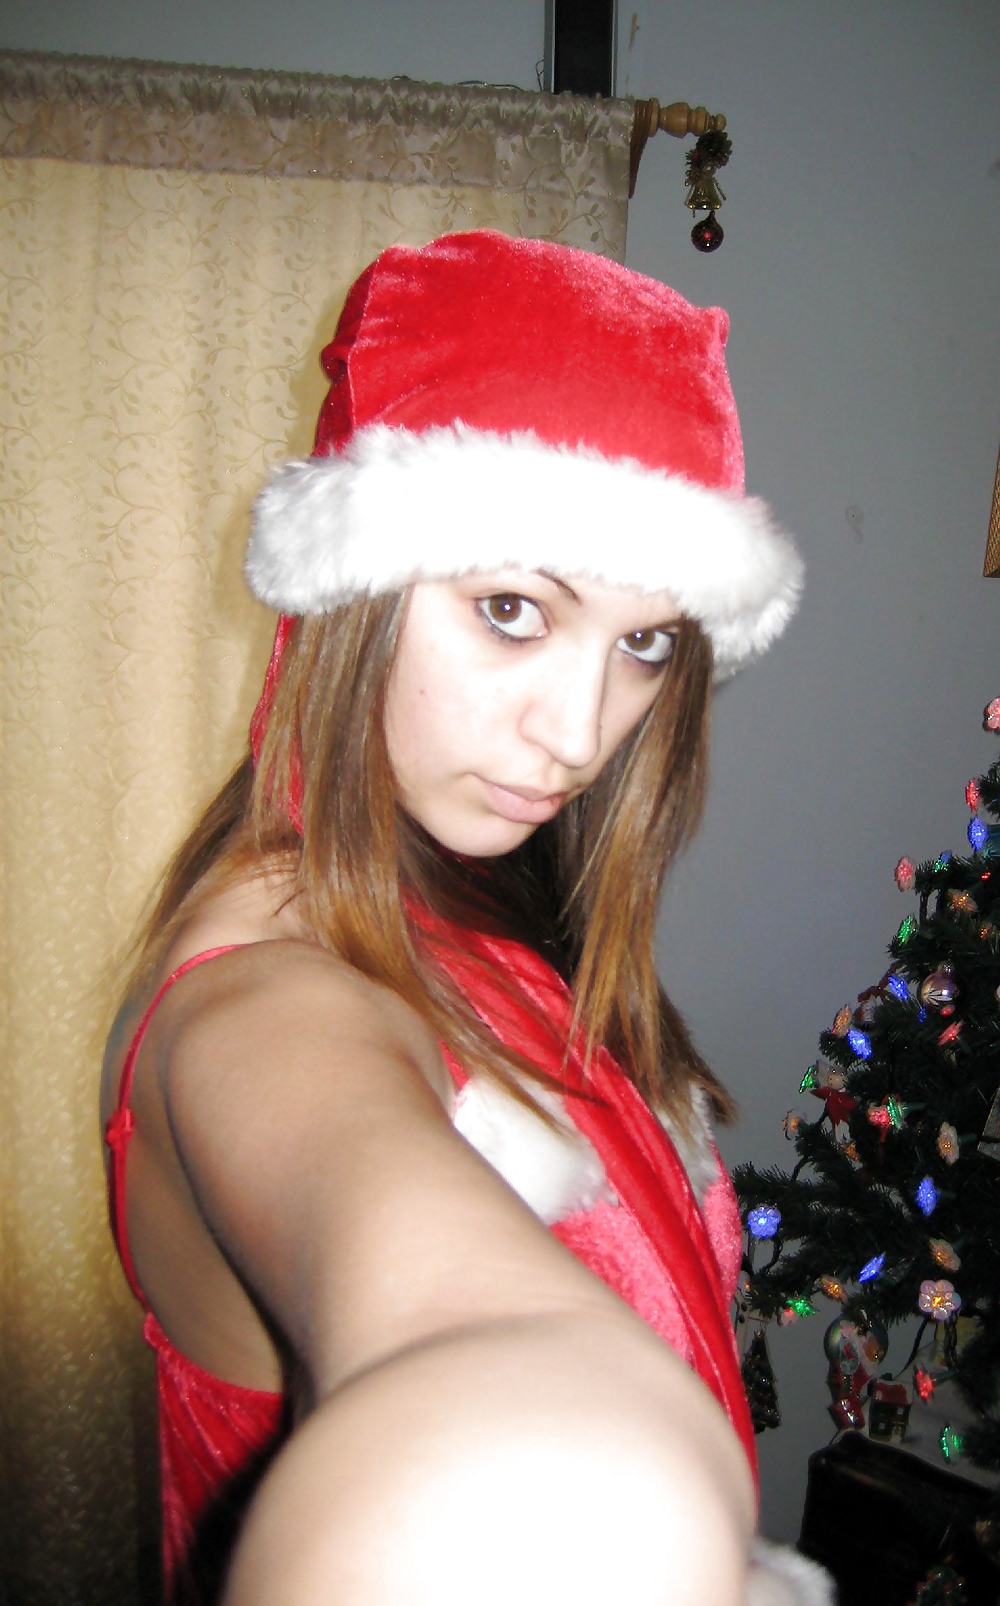 XXX All I Wanted for Christmas is to BOUNCE on santa's lap